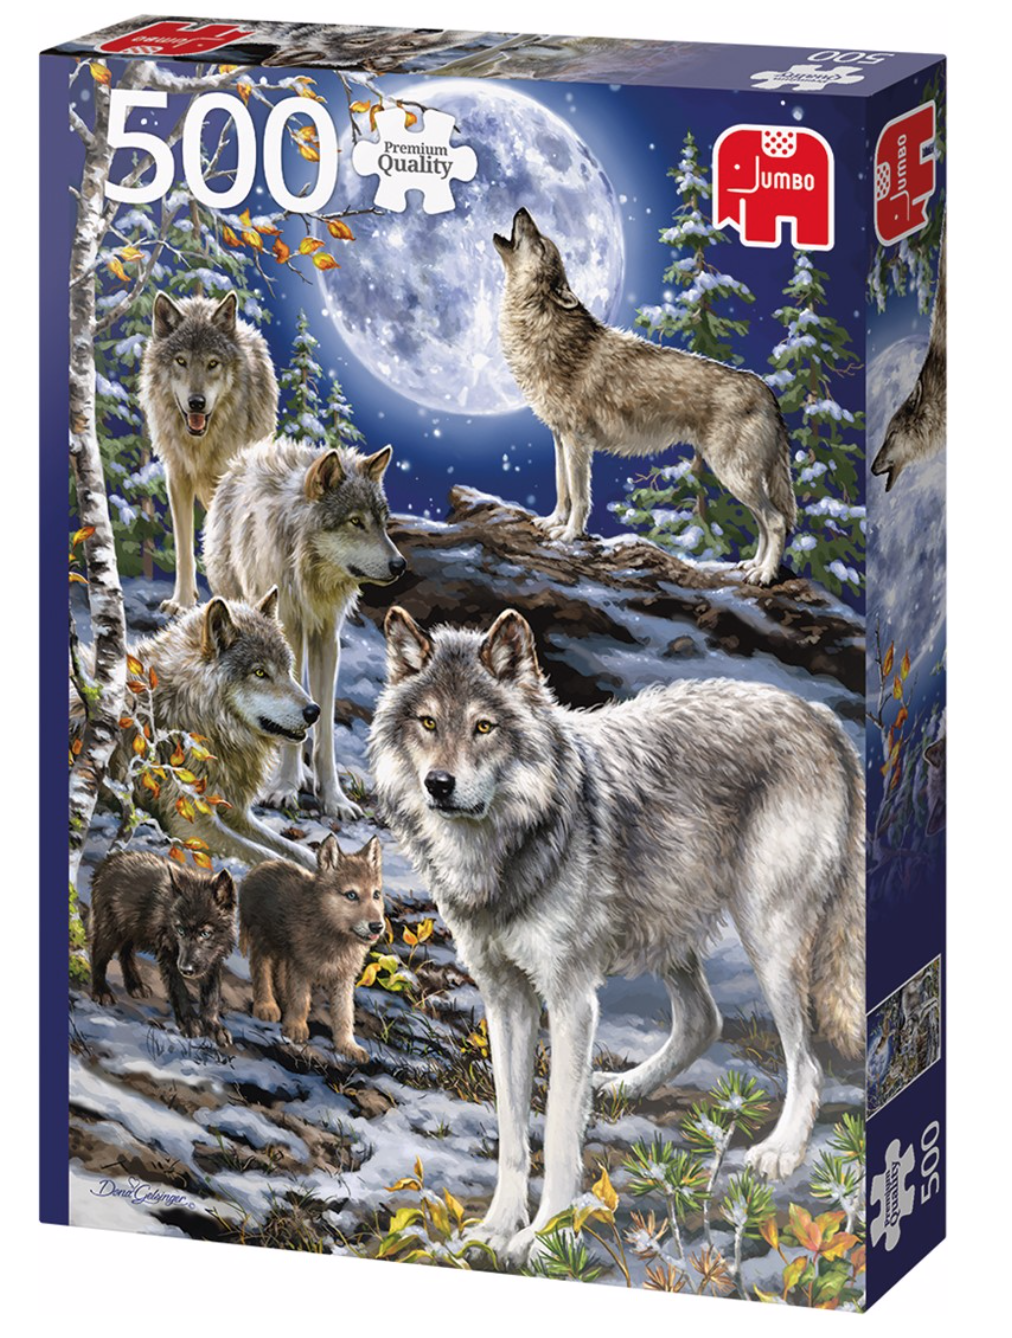 RARE FAUX-STITCH JIGSAW Puzzle 500 Pieces WOLVES IN TREES - In Aid Of BCRT  £4.99 - PicClick UK